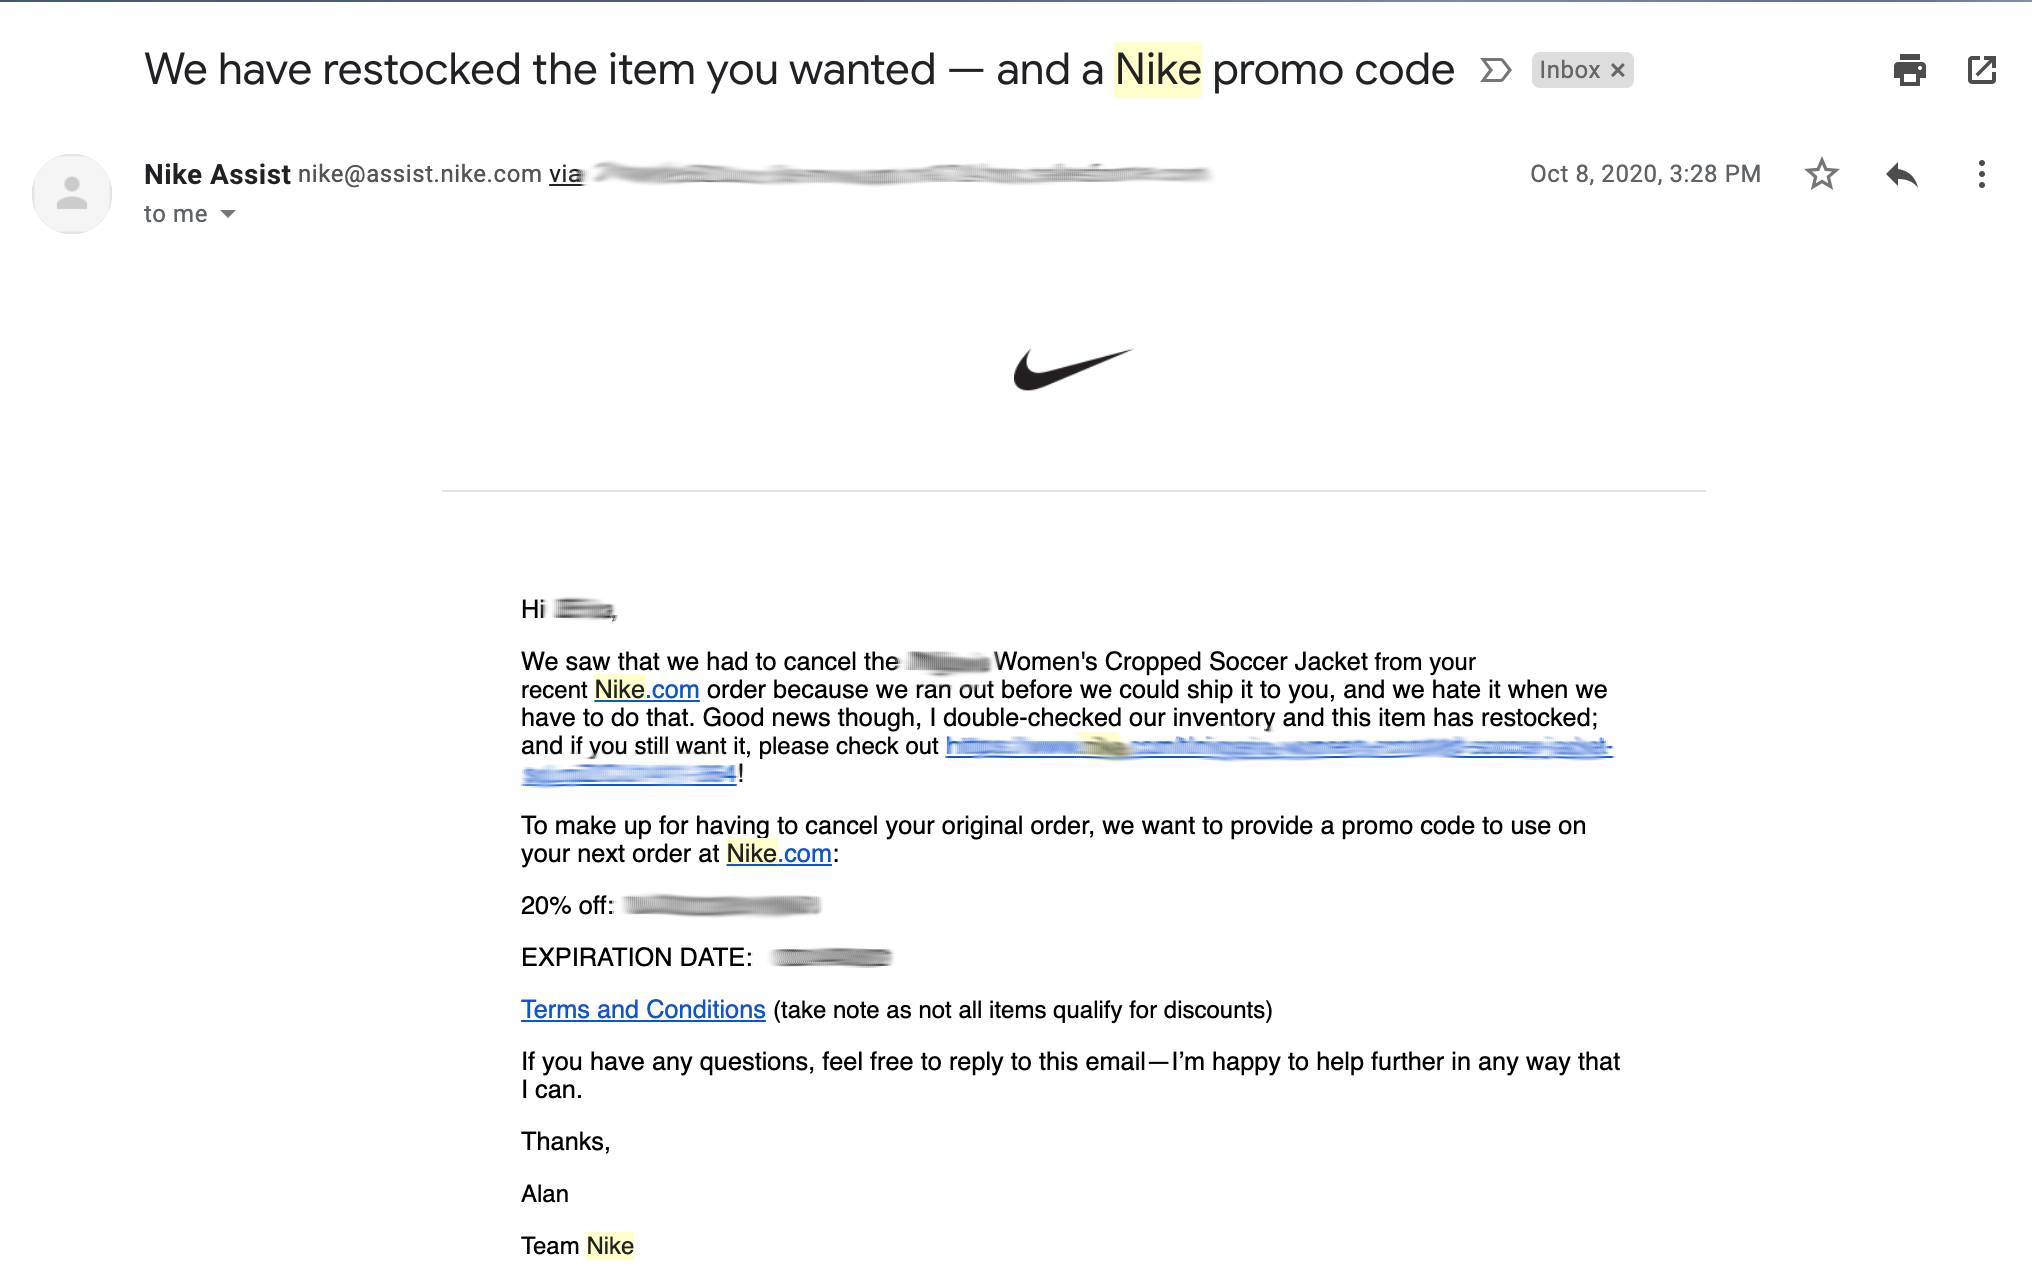 Email demonstrating Nike delivering personalized service to customer with a discount code